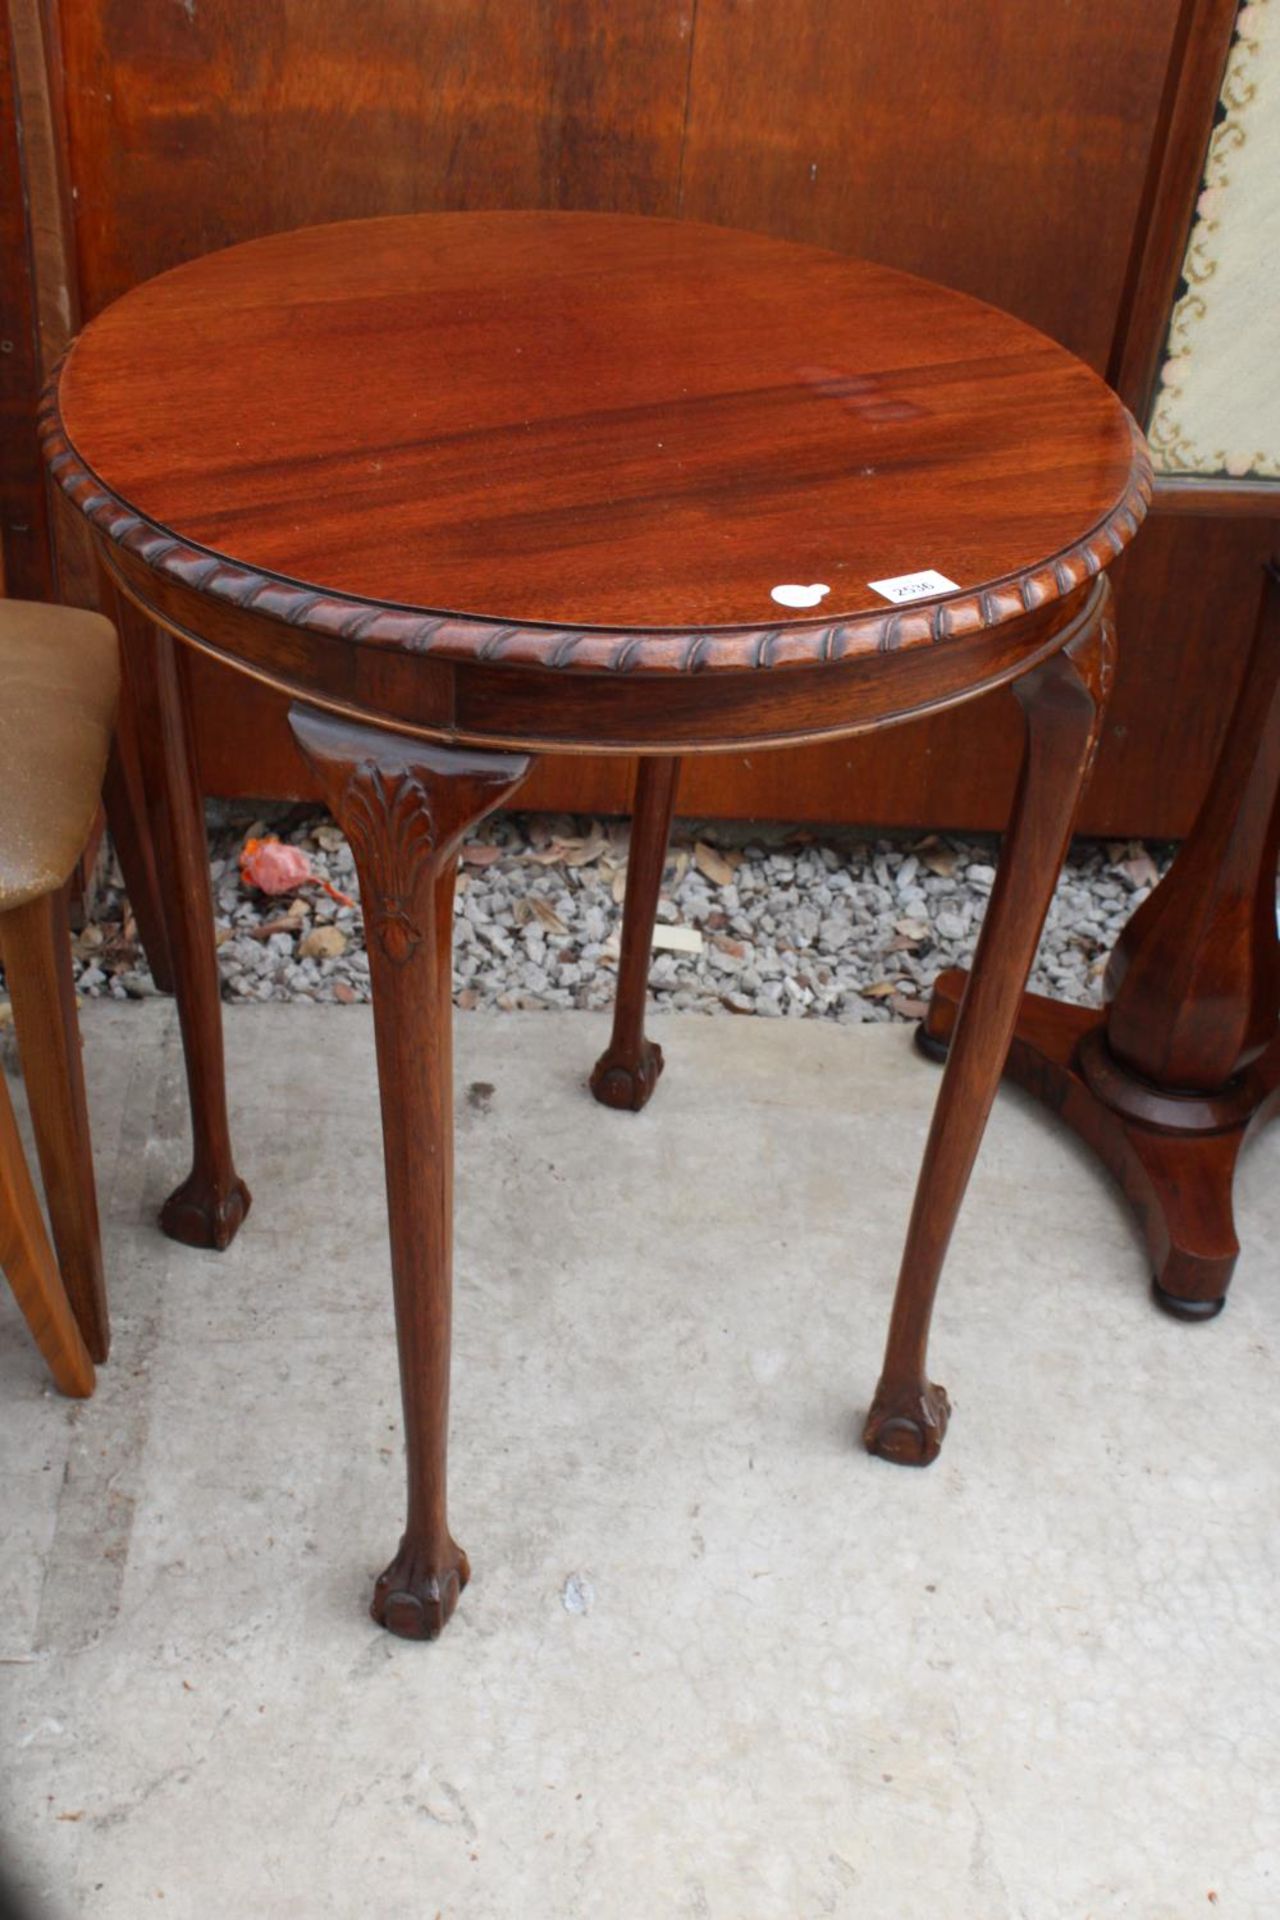 AN EARLY 20TH CENTURY MAHOGANY ROPE EDGE 24" DIAMETER CENTRE TABLE ON CABRIOLE LEGS WITH BALL AND